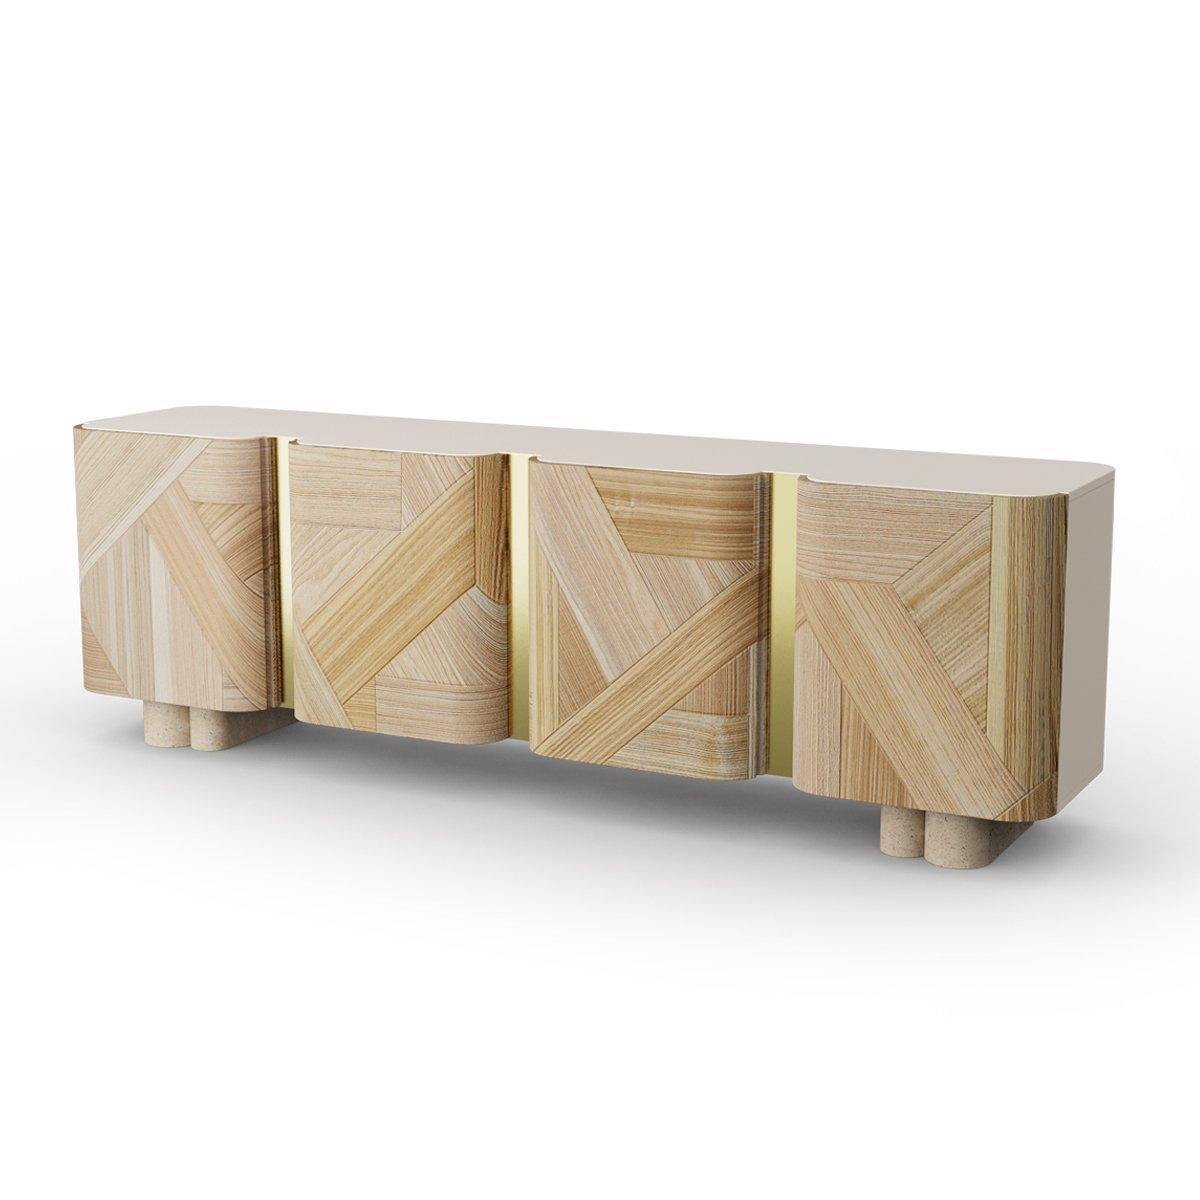 Sculpted contemporary sideboard by Dooq

Dimensions
W 250 x D 55 x H 80 cm

Materials & Finishes
Structure: lacquered MDF
Doors: wood veneer
Feet: natural travertine
Metal applications: polished brass, copper or nickel, or satin brass,